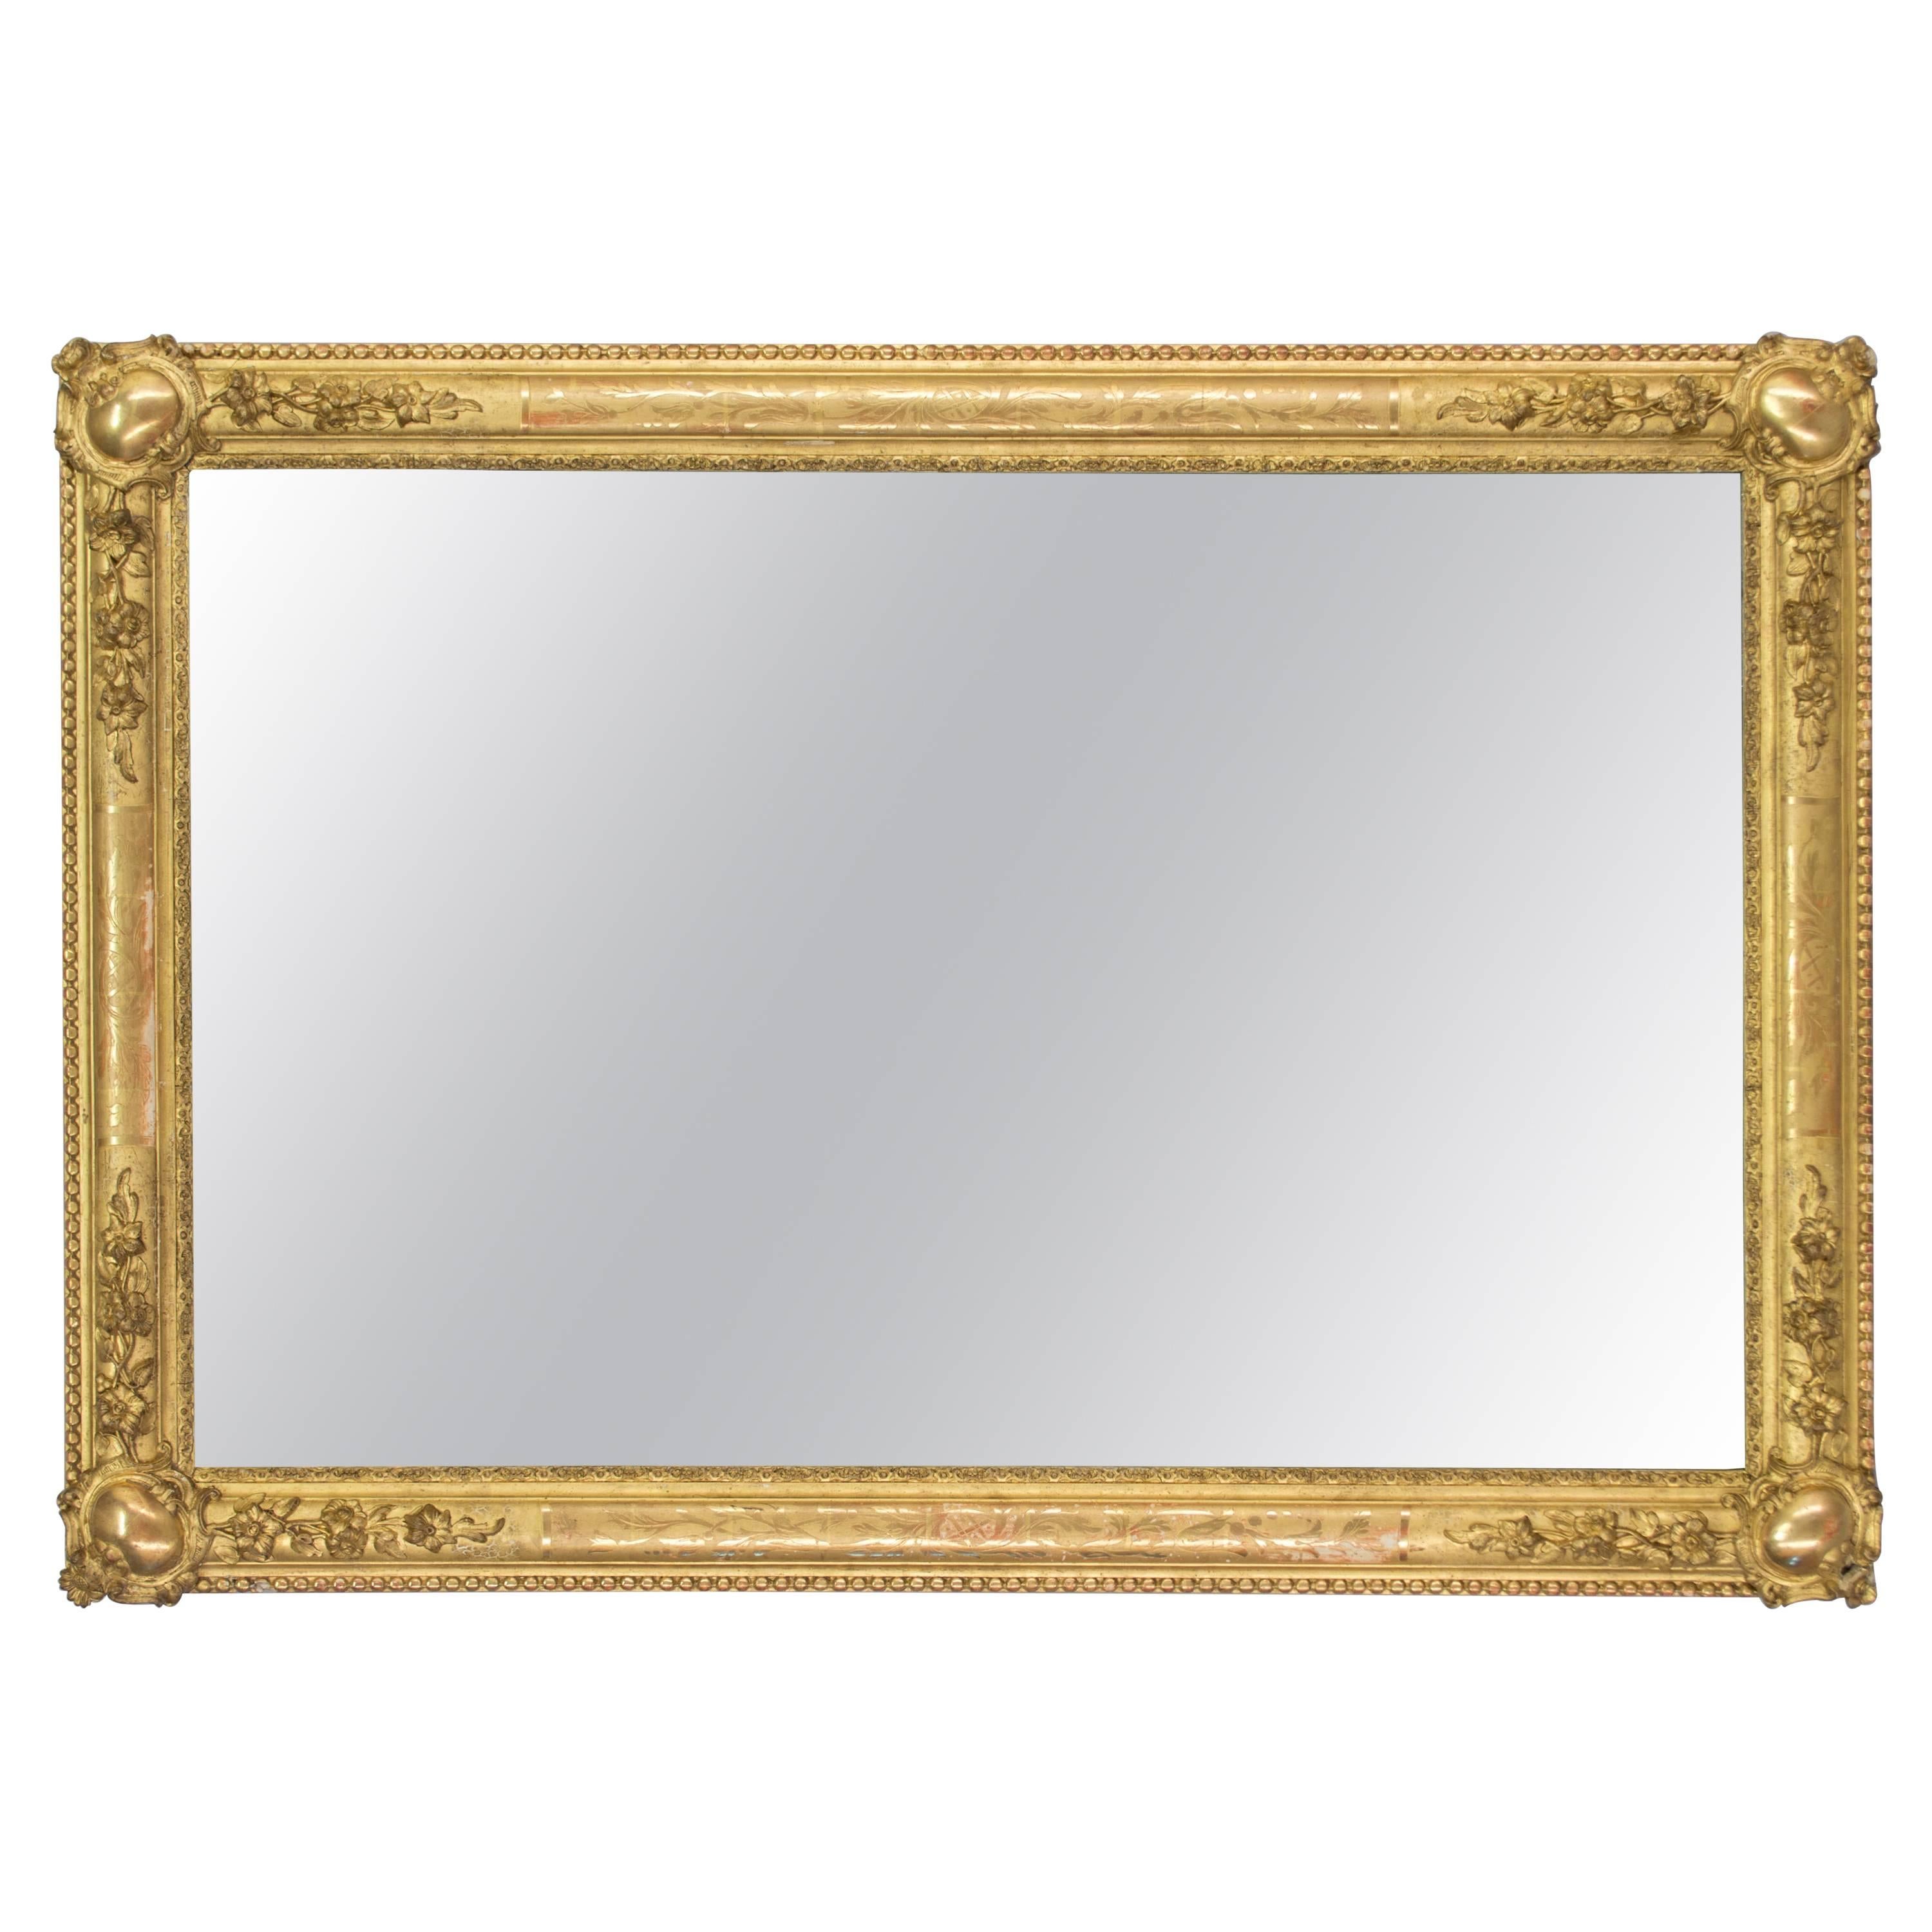 19th Century French Gilded Mirror